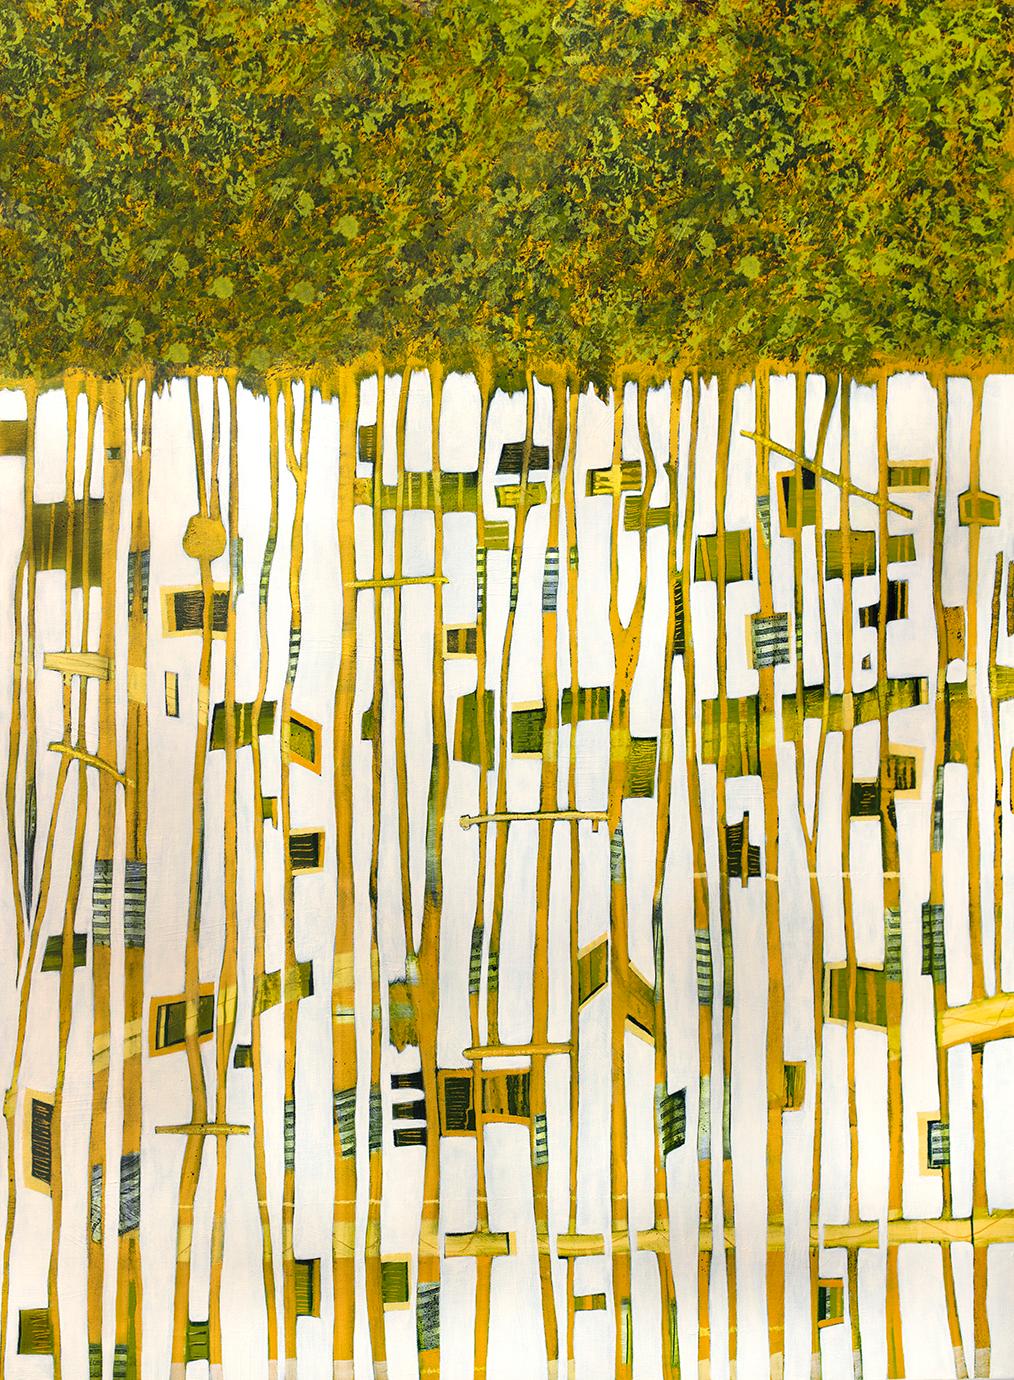 "Memories II" is a painting that is part of a triptych, together with "Memories I" and "Memories III". It can be purchased alone or with the other two pieces in the triptych. In it, green and yellow geometric and organic shapes stretch up vertically